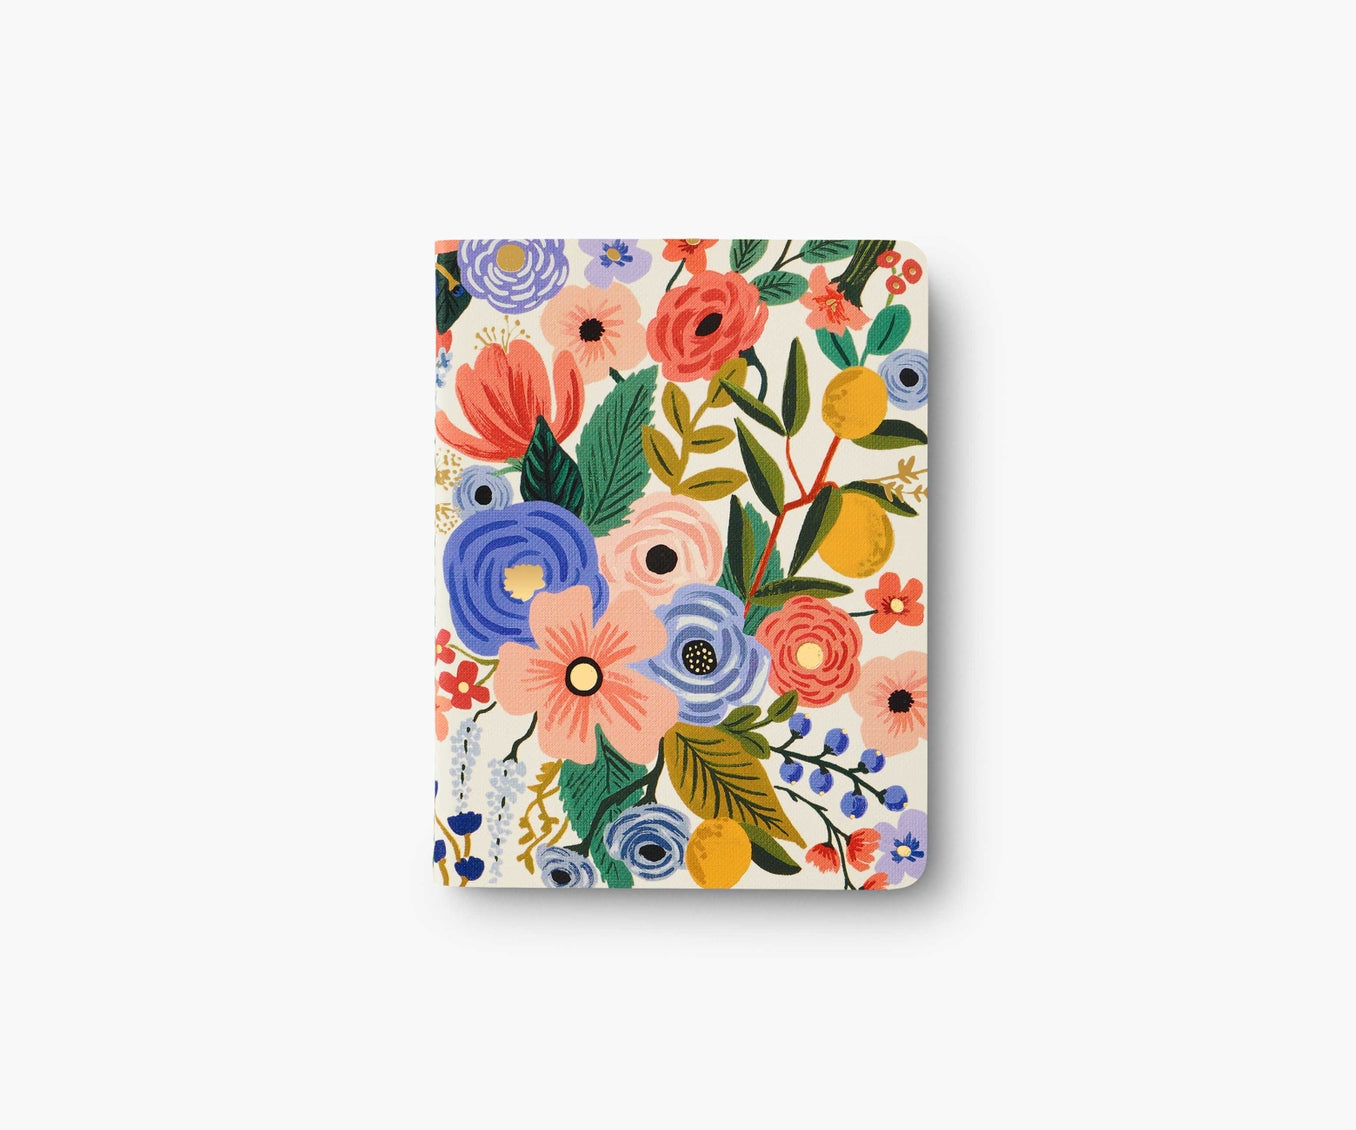 Rifle Paper Co Pocket Notebook Boxed Set - Garden Party